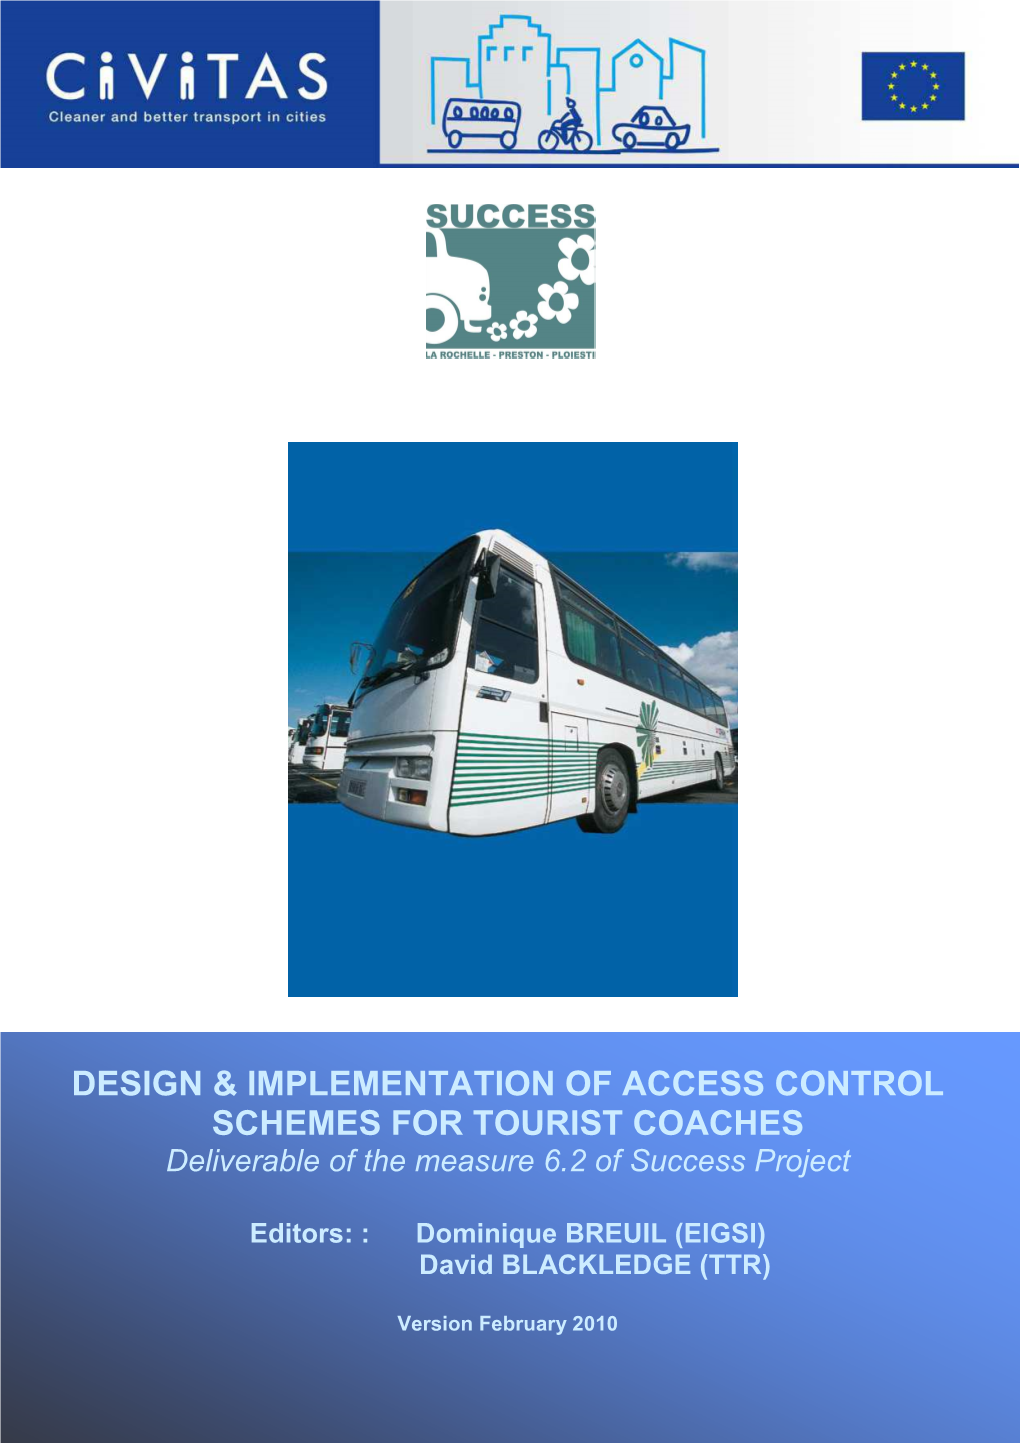 Design and Implementation of Access Control Schemes for Tourist Coaches